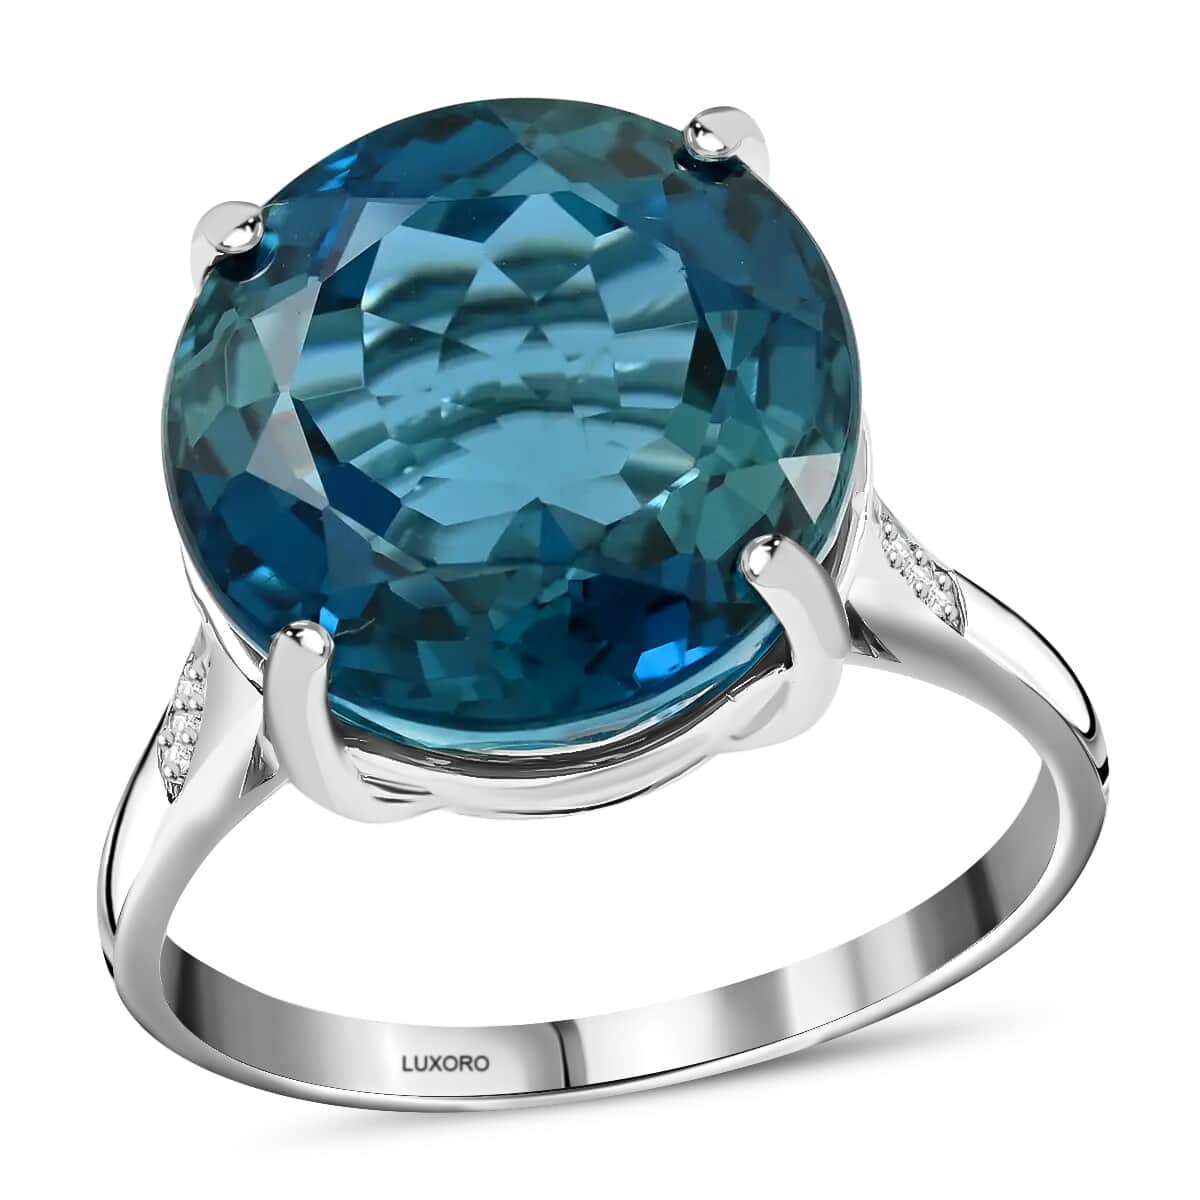 LUXORO 10K White Gold AAA London Blue Topaz and G-H I2 Diamond Ring 3.40 Grams 13.10 ctw image number 0